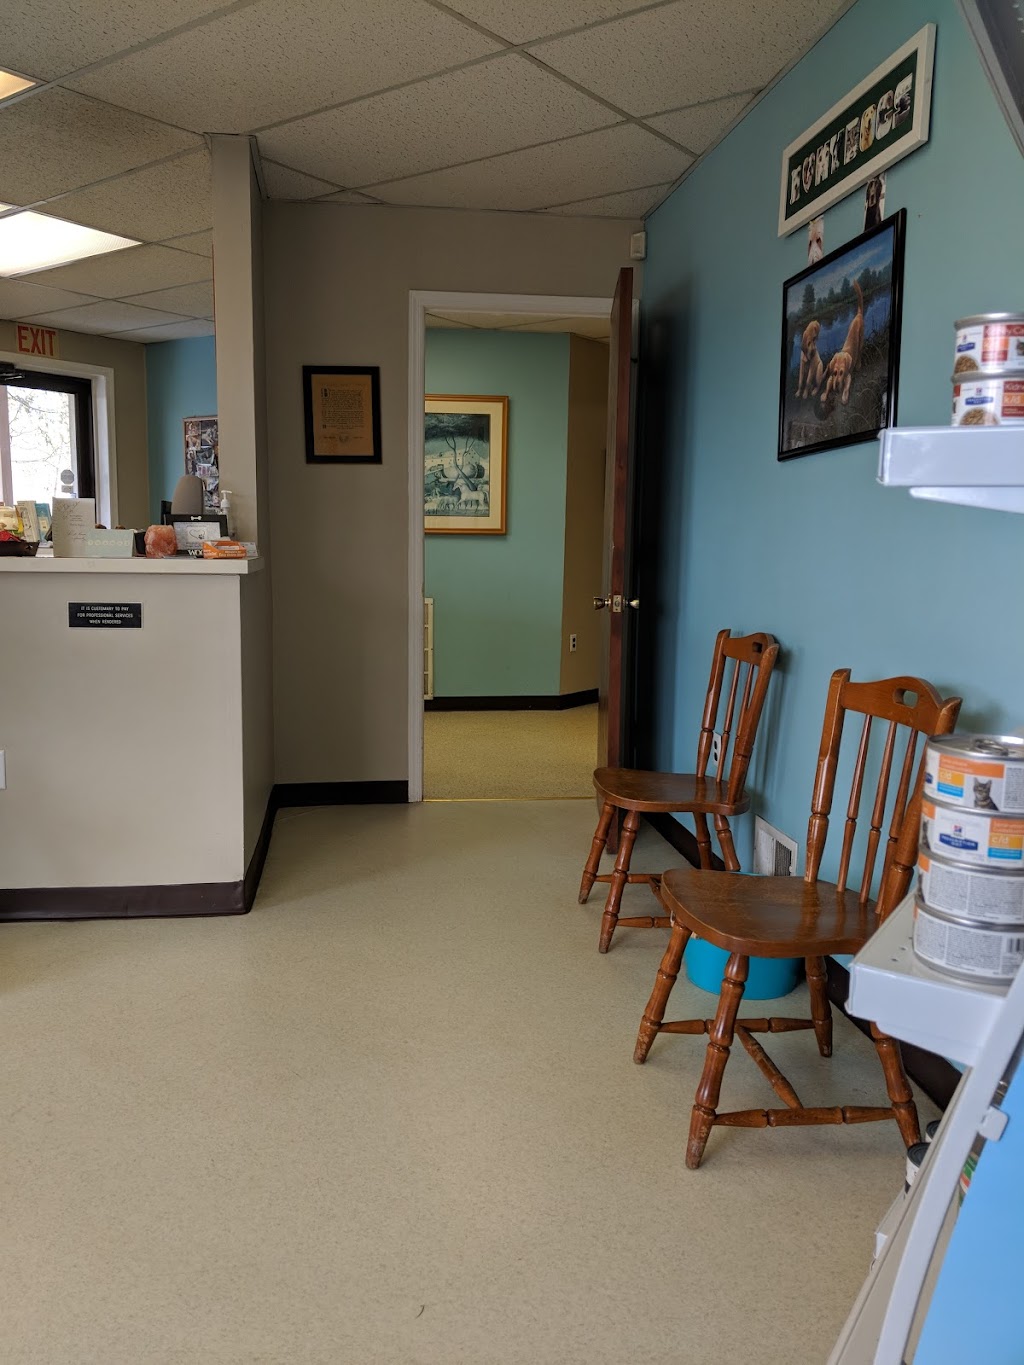 Colonial Animal Hospital | 163 County Rd 537, Colts Neck, NJ 07722 | Phone: (732) 780-5290